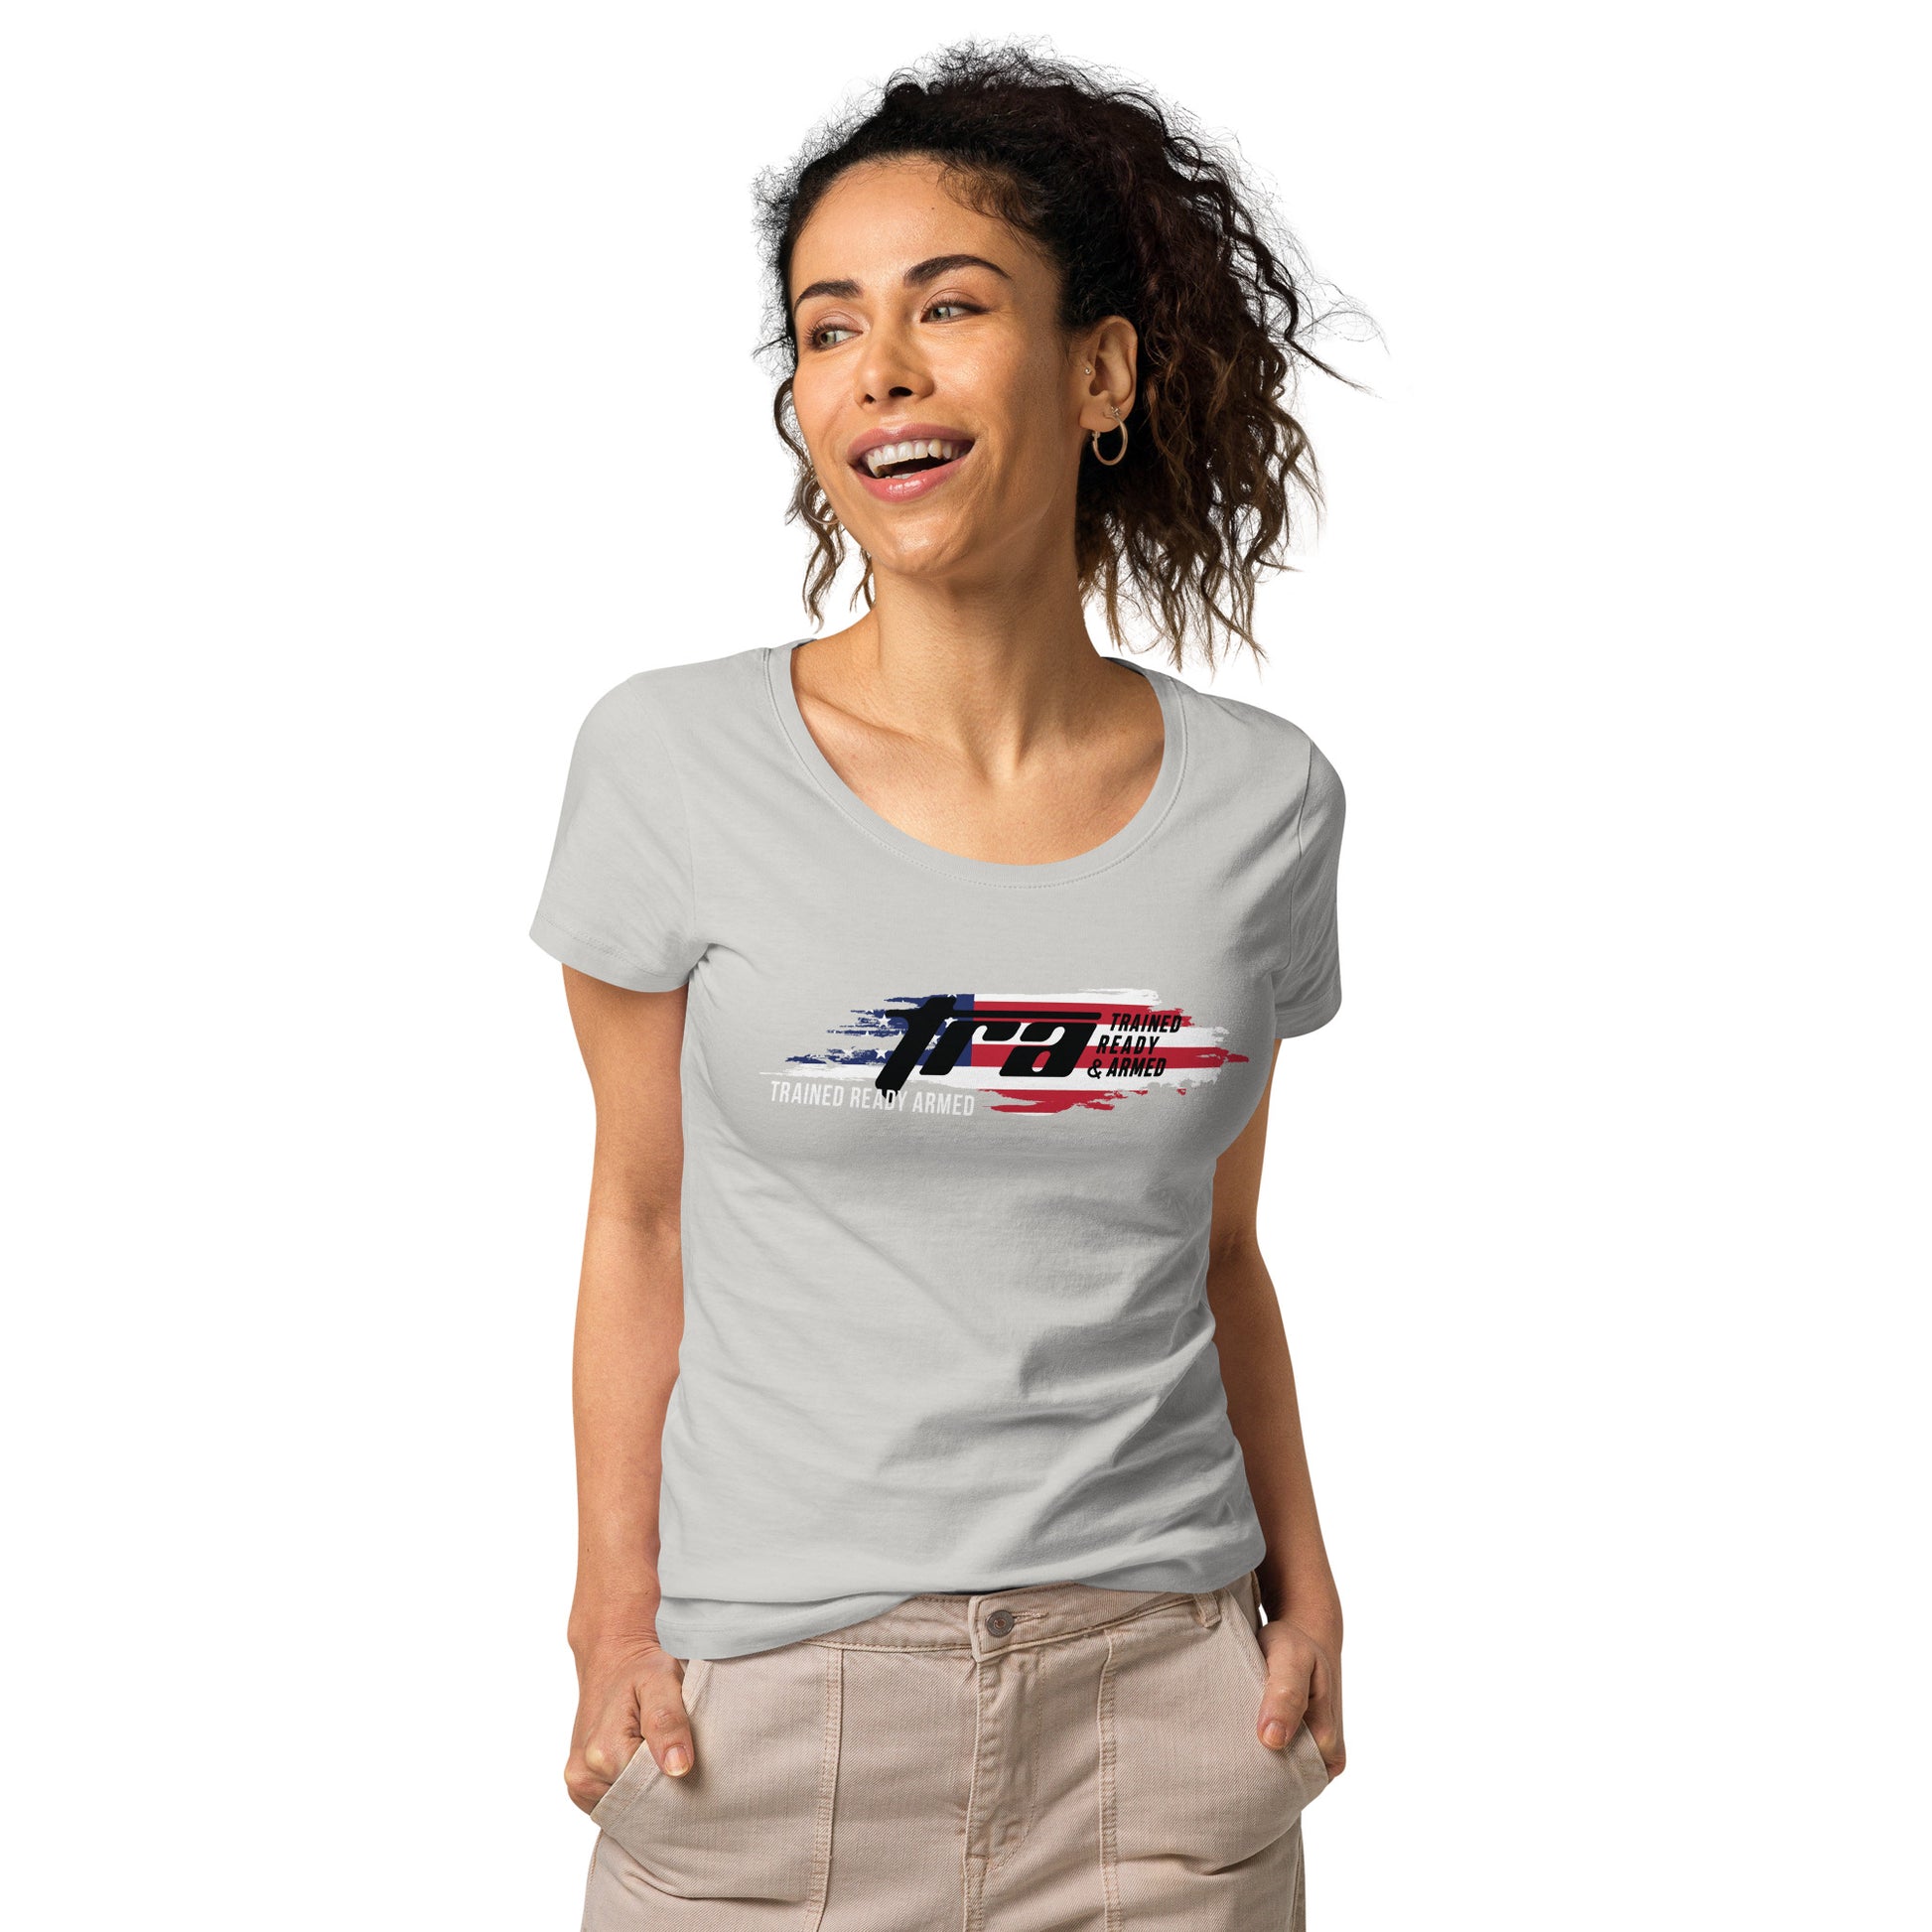 TRA USA Women’s basic organic t-shirt - Trained Ready Armed Apparel